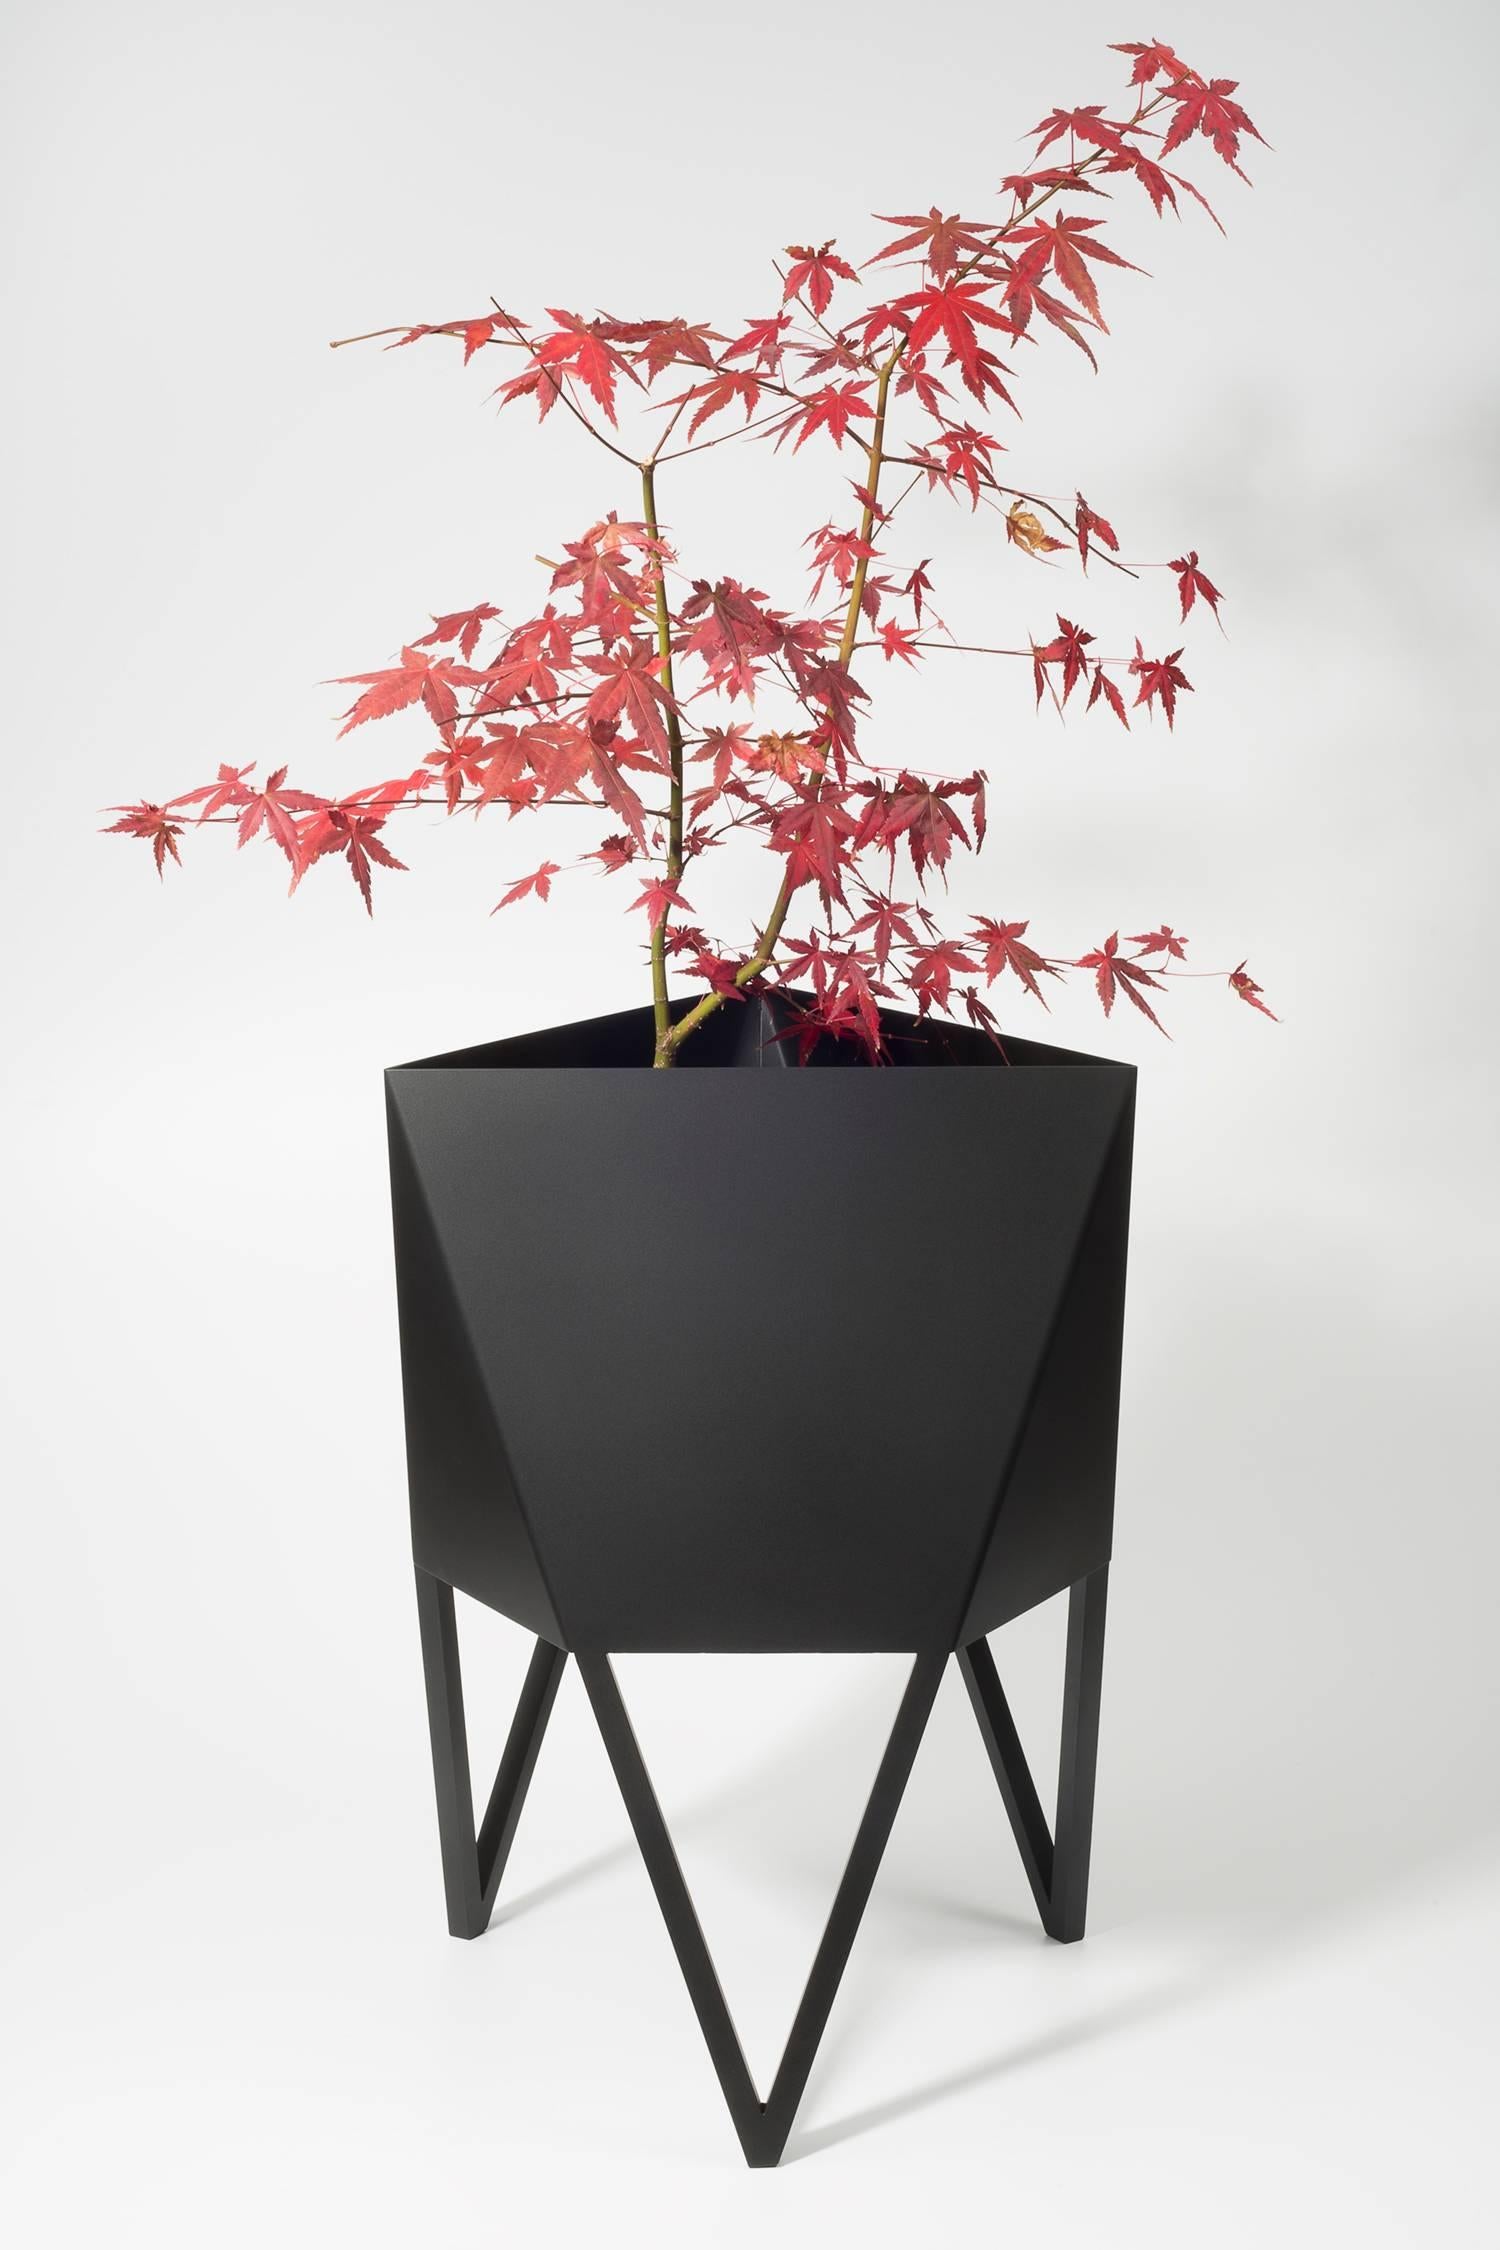 Deca Planter in Living Coral Steel, Small, by Force/Collide 3